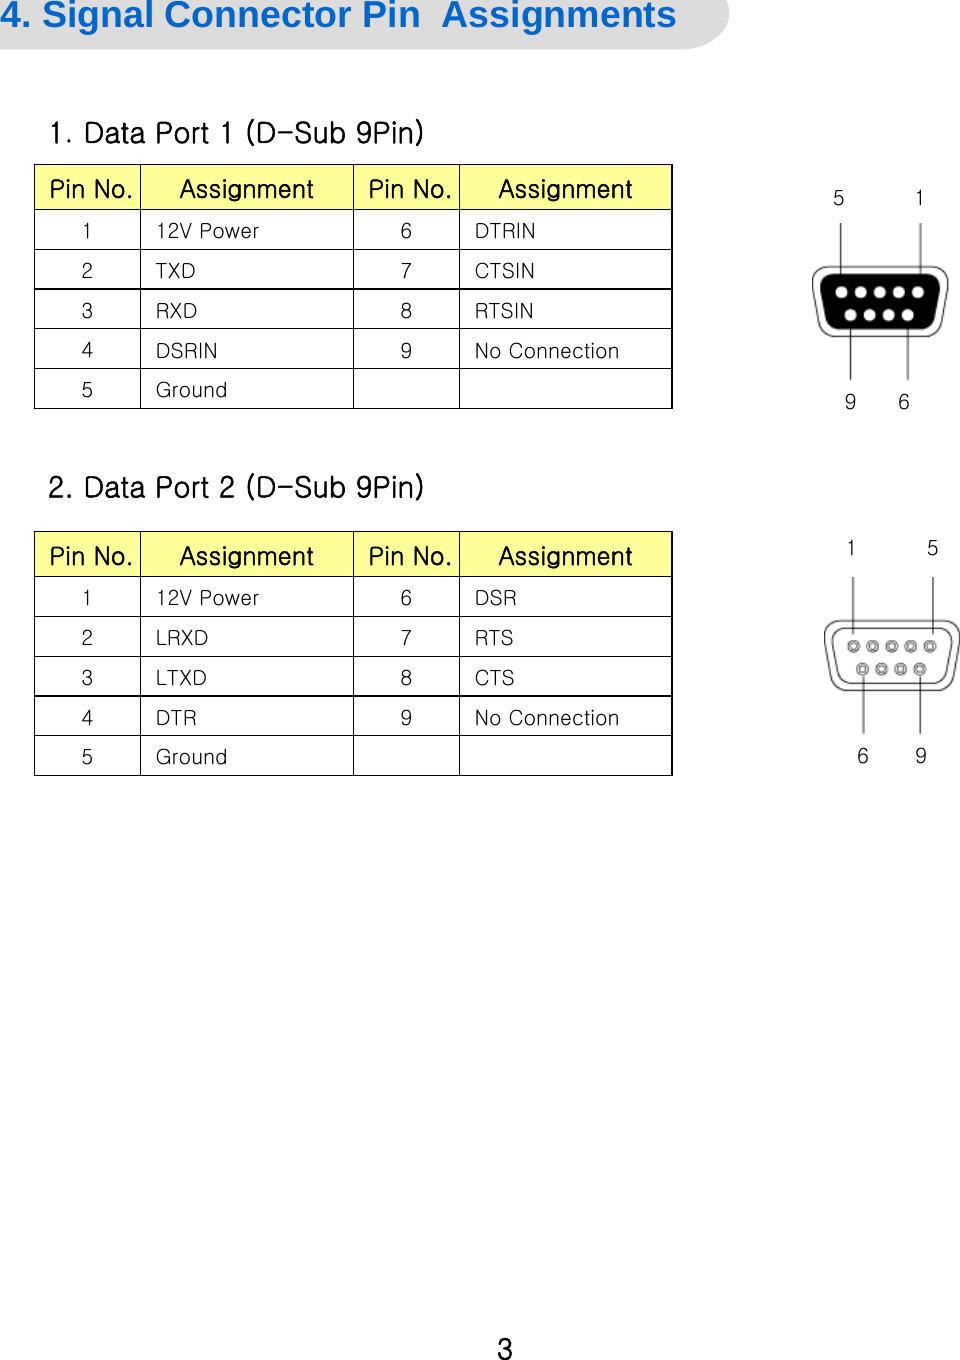 General Specification 4. Signal Connector Pin  Assignments3Ground54321Pin No.DTRIN612V PowerRTSIN8RXDNo Connection9DSRINCTSIN7TXDAssignmentPin No.Assignment1. Data Port 1 (D-Sub 9Pin)2. Data Port 2 (D-Sub 9Pin)Ground54321Pin No.DSR612V PowerCTS8LTXDNo Connection9DTRRTS7LRXDAssignmentPin No.Assignment15695196